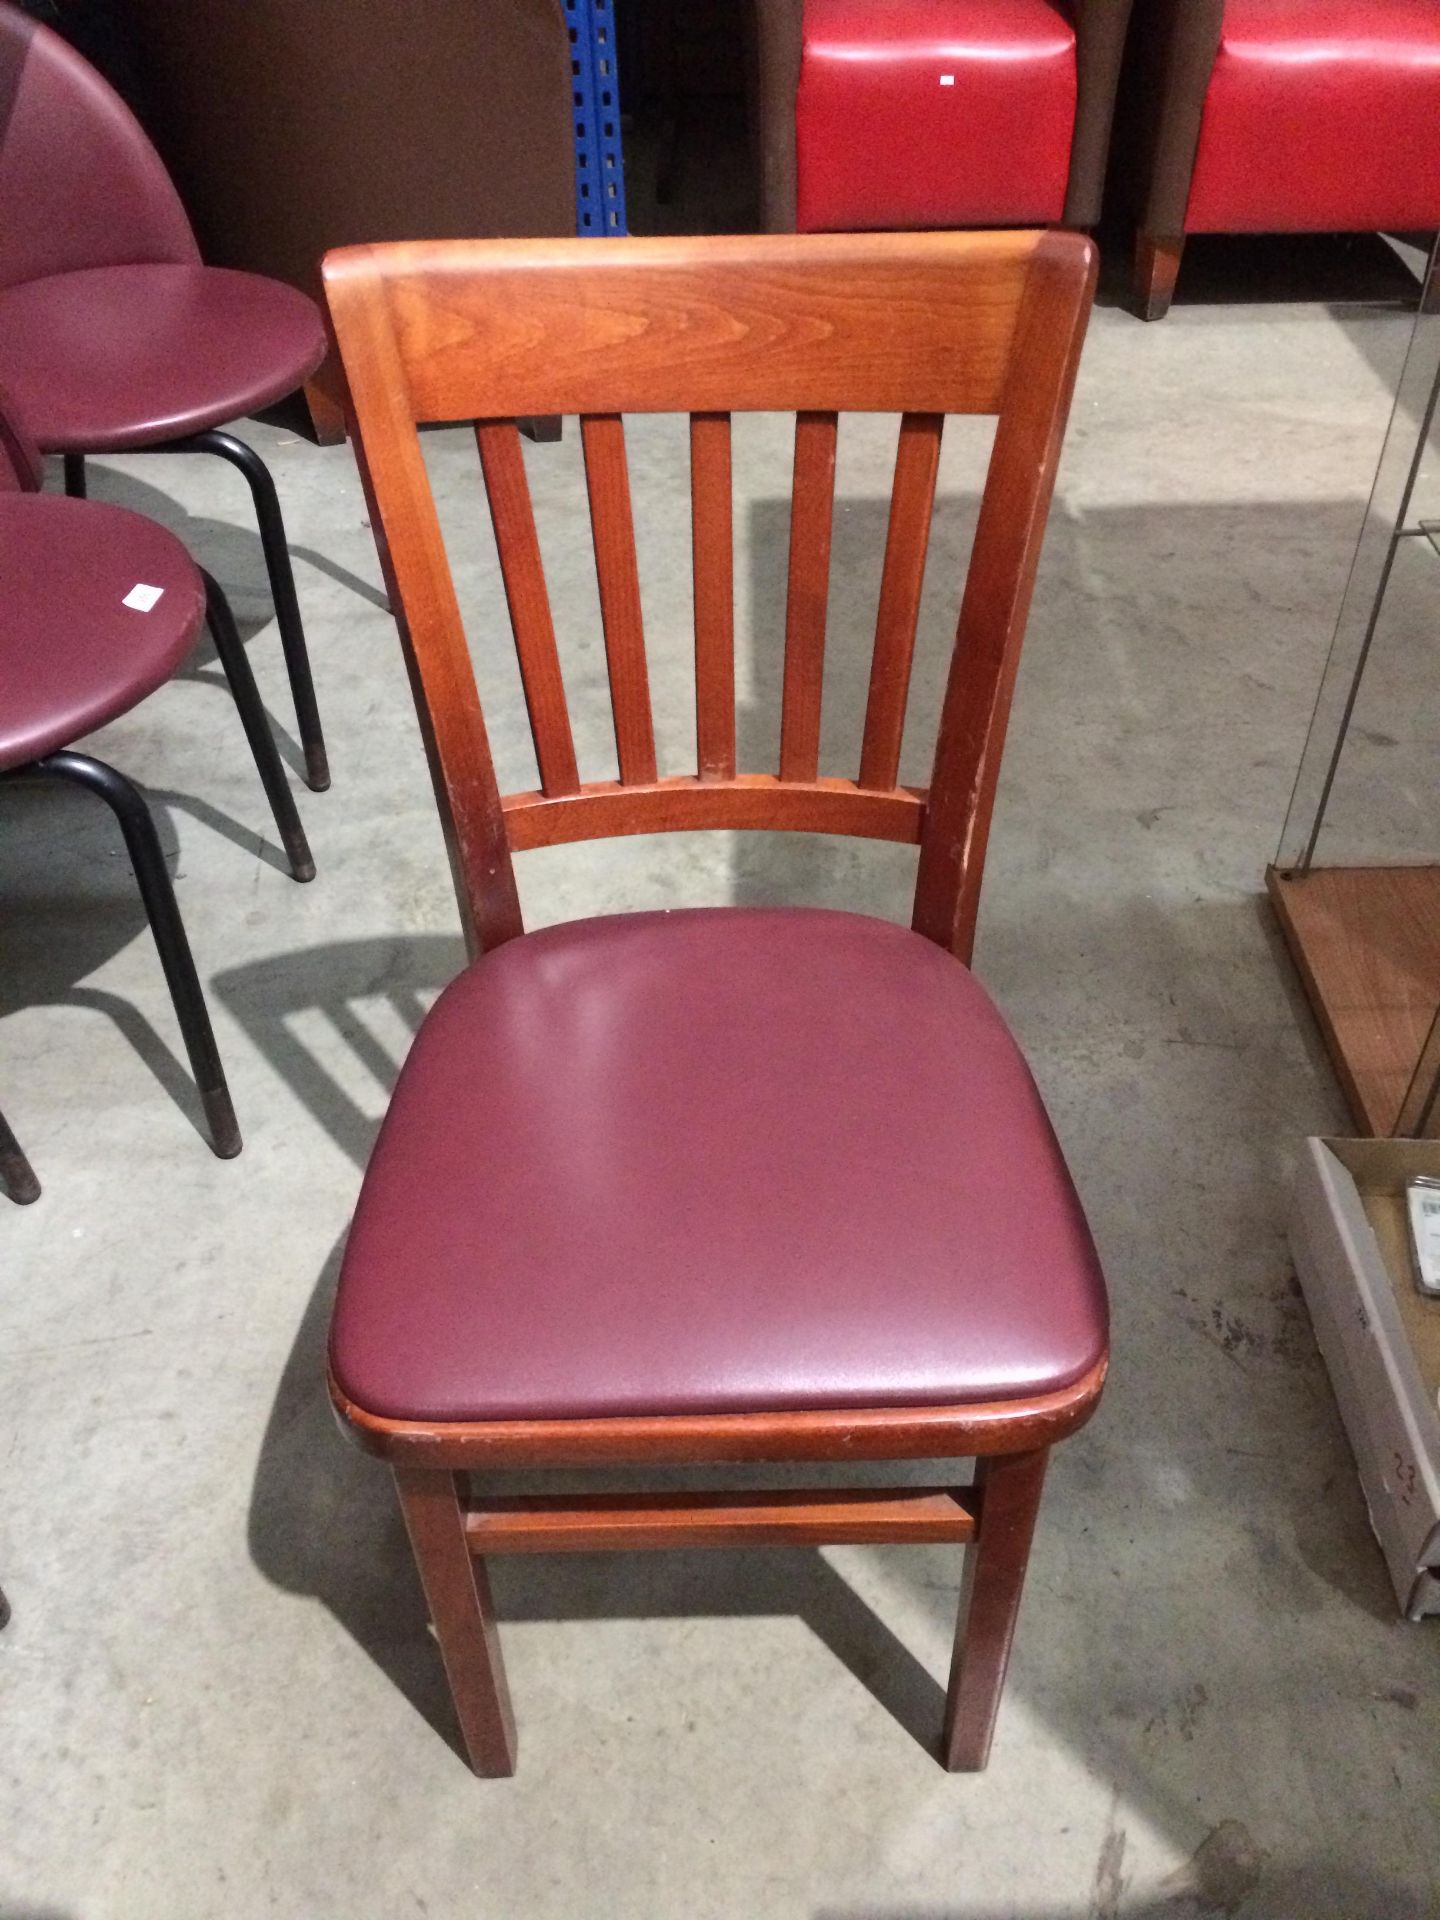 4 x dark oak ladder back cafe/bar chairs with purple vinyl upholstery